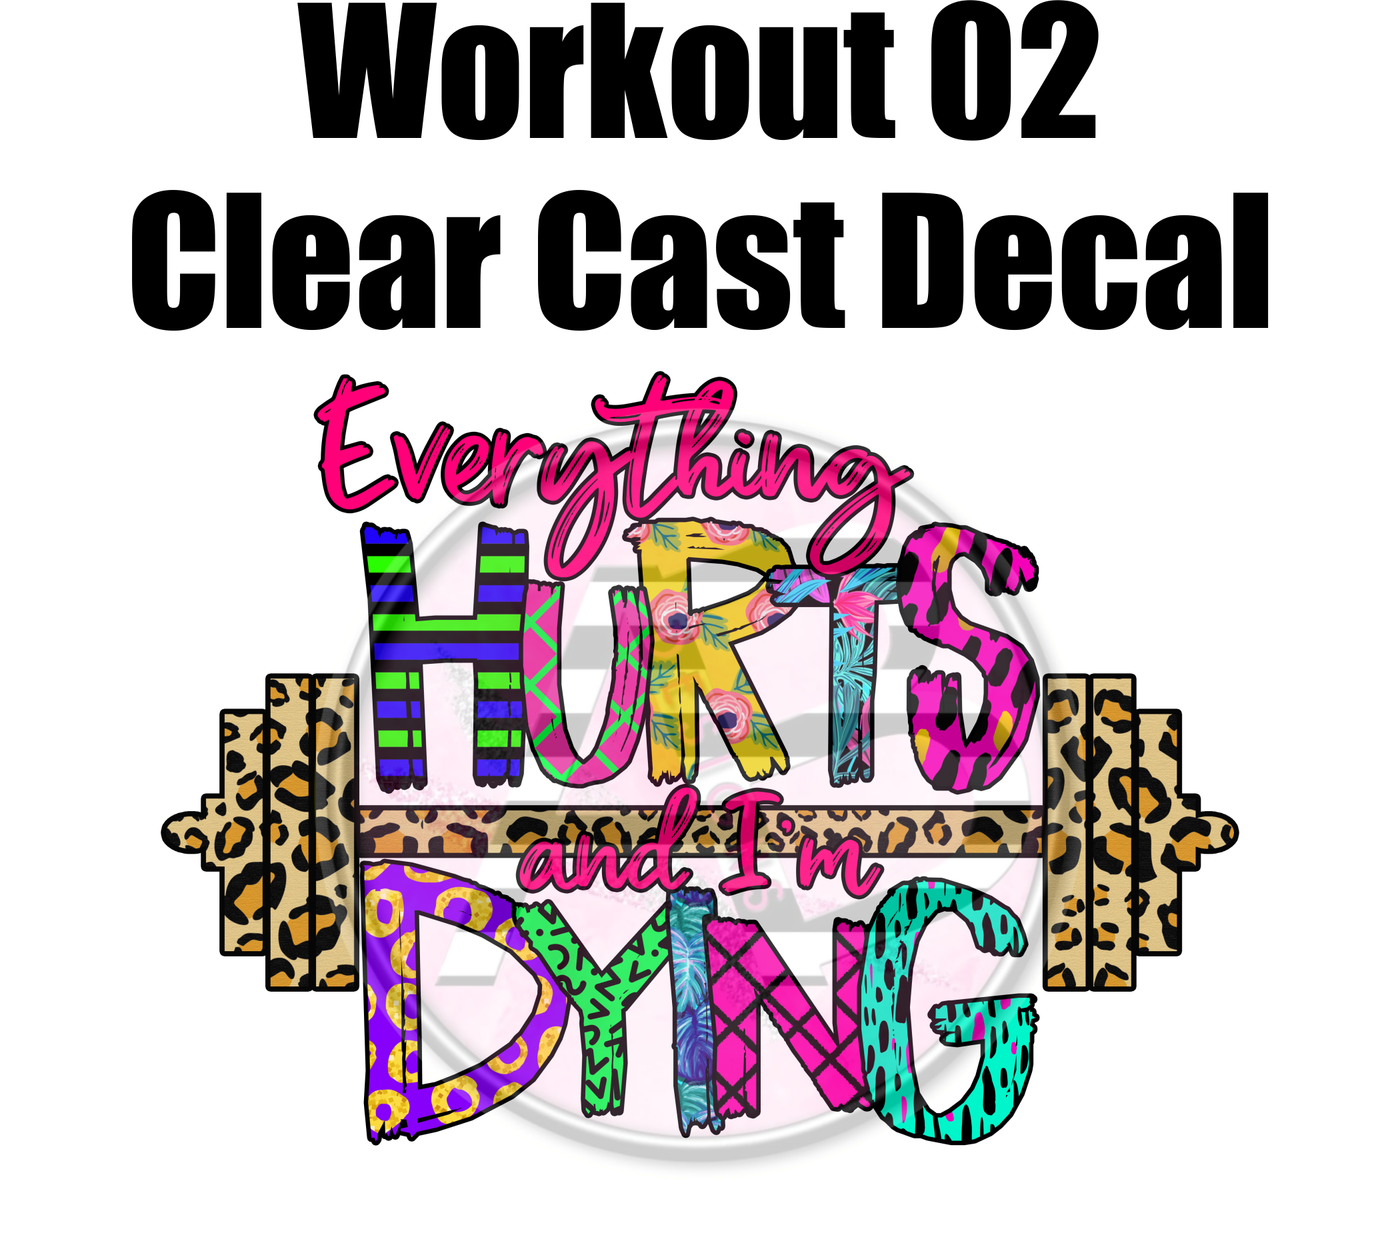 Workout 02 - Clear Cast Decal